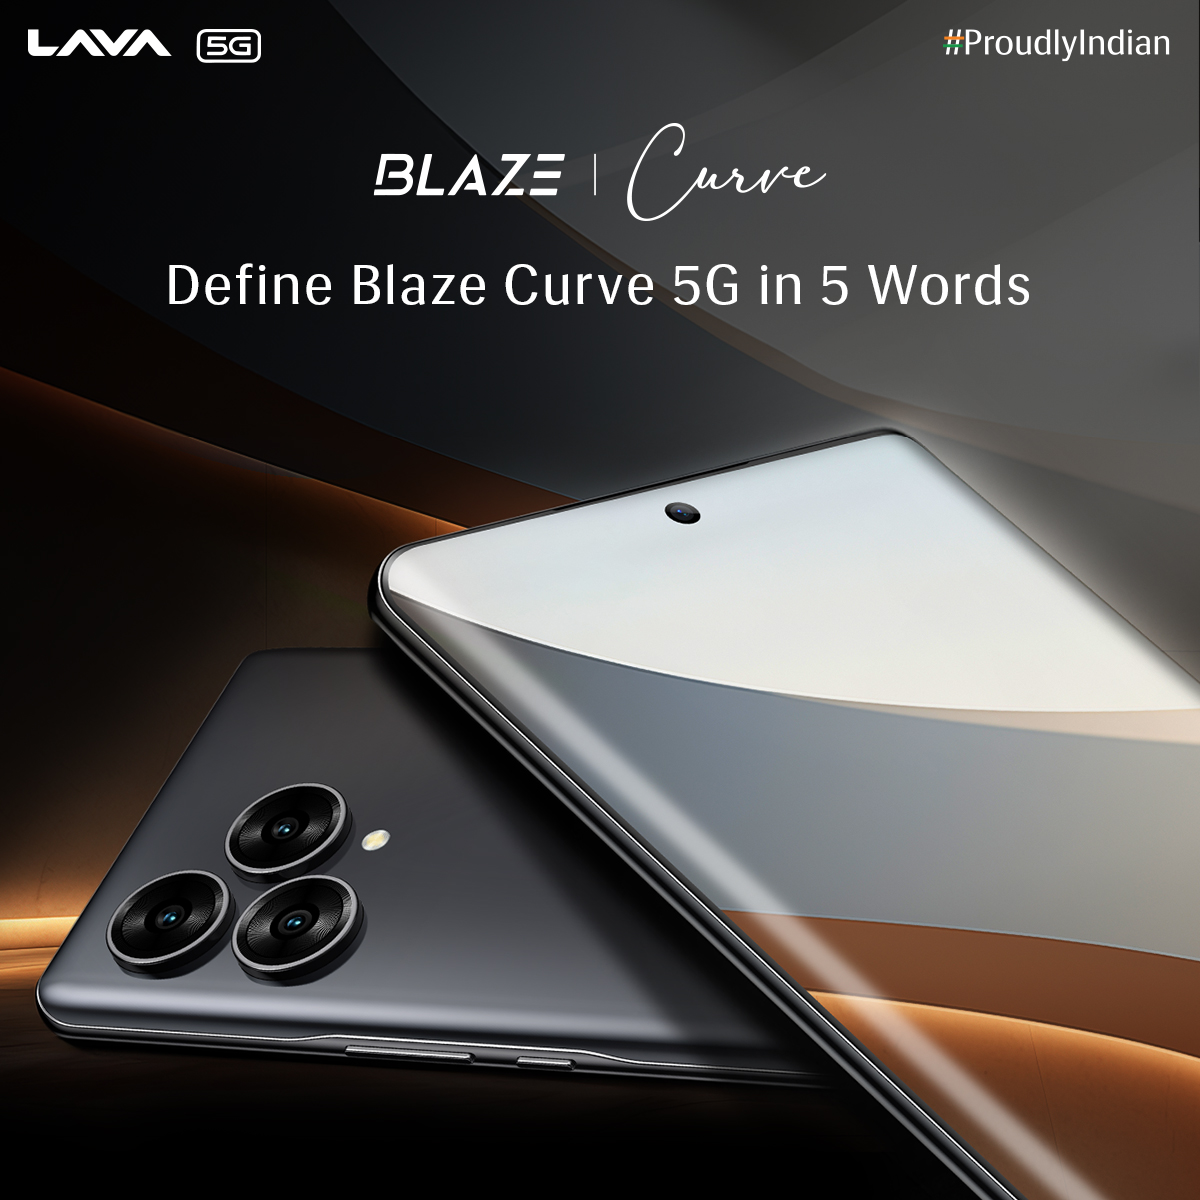 Define Blaze Curve 5G in 5 words. 7 of the most creative answers will win the latest #BlazeCurve5G All you've to do is: 👉Follow me @reachraina 👉Tag your friends 👉Comment your answer Contest ends tonight! T&C Apply #LavaMobiles